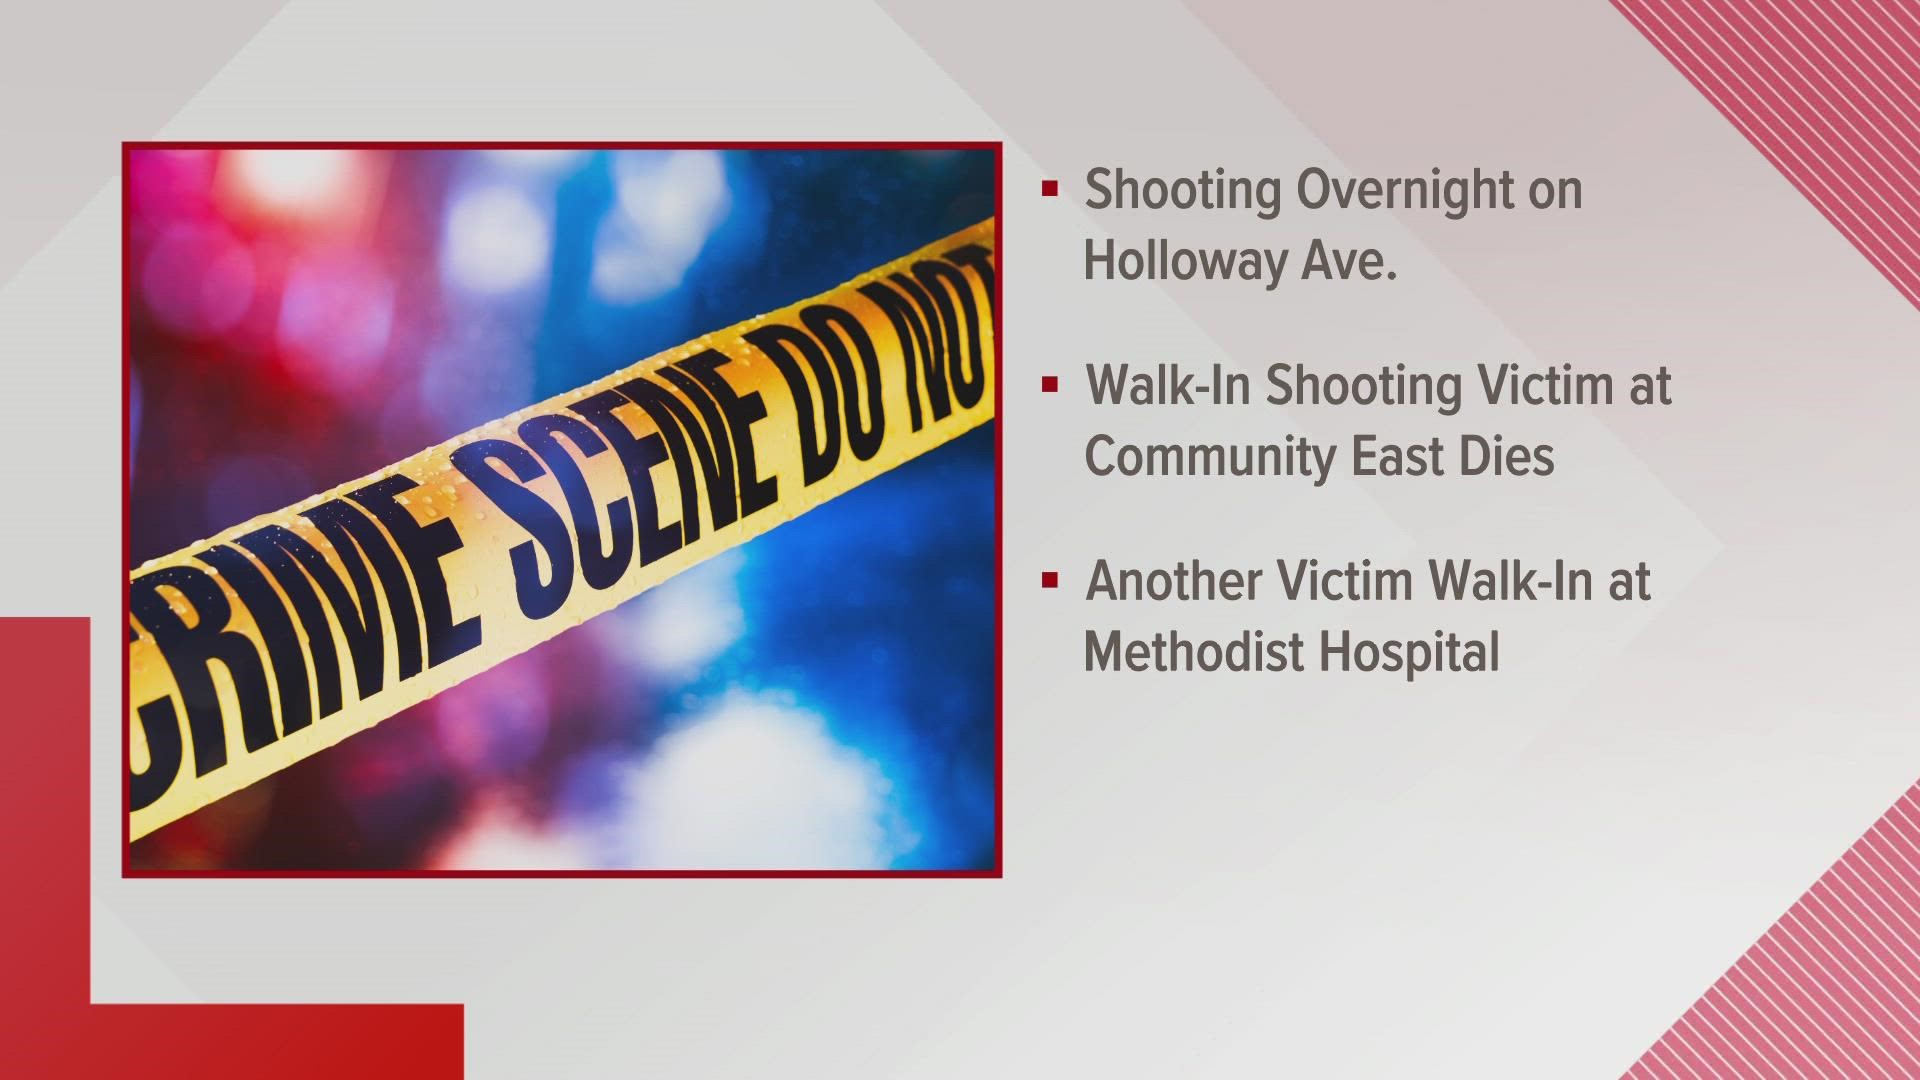 Officers responded to two Indianapolis hospitals for walk-in shooting victims Tuesday morning. One has died and the other was in stable condition, IMPD said.